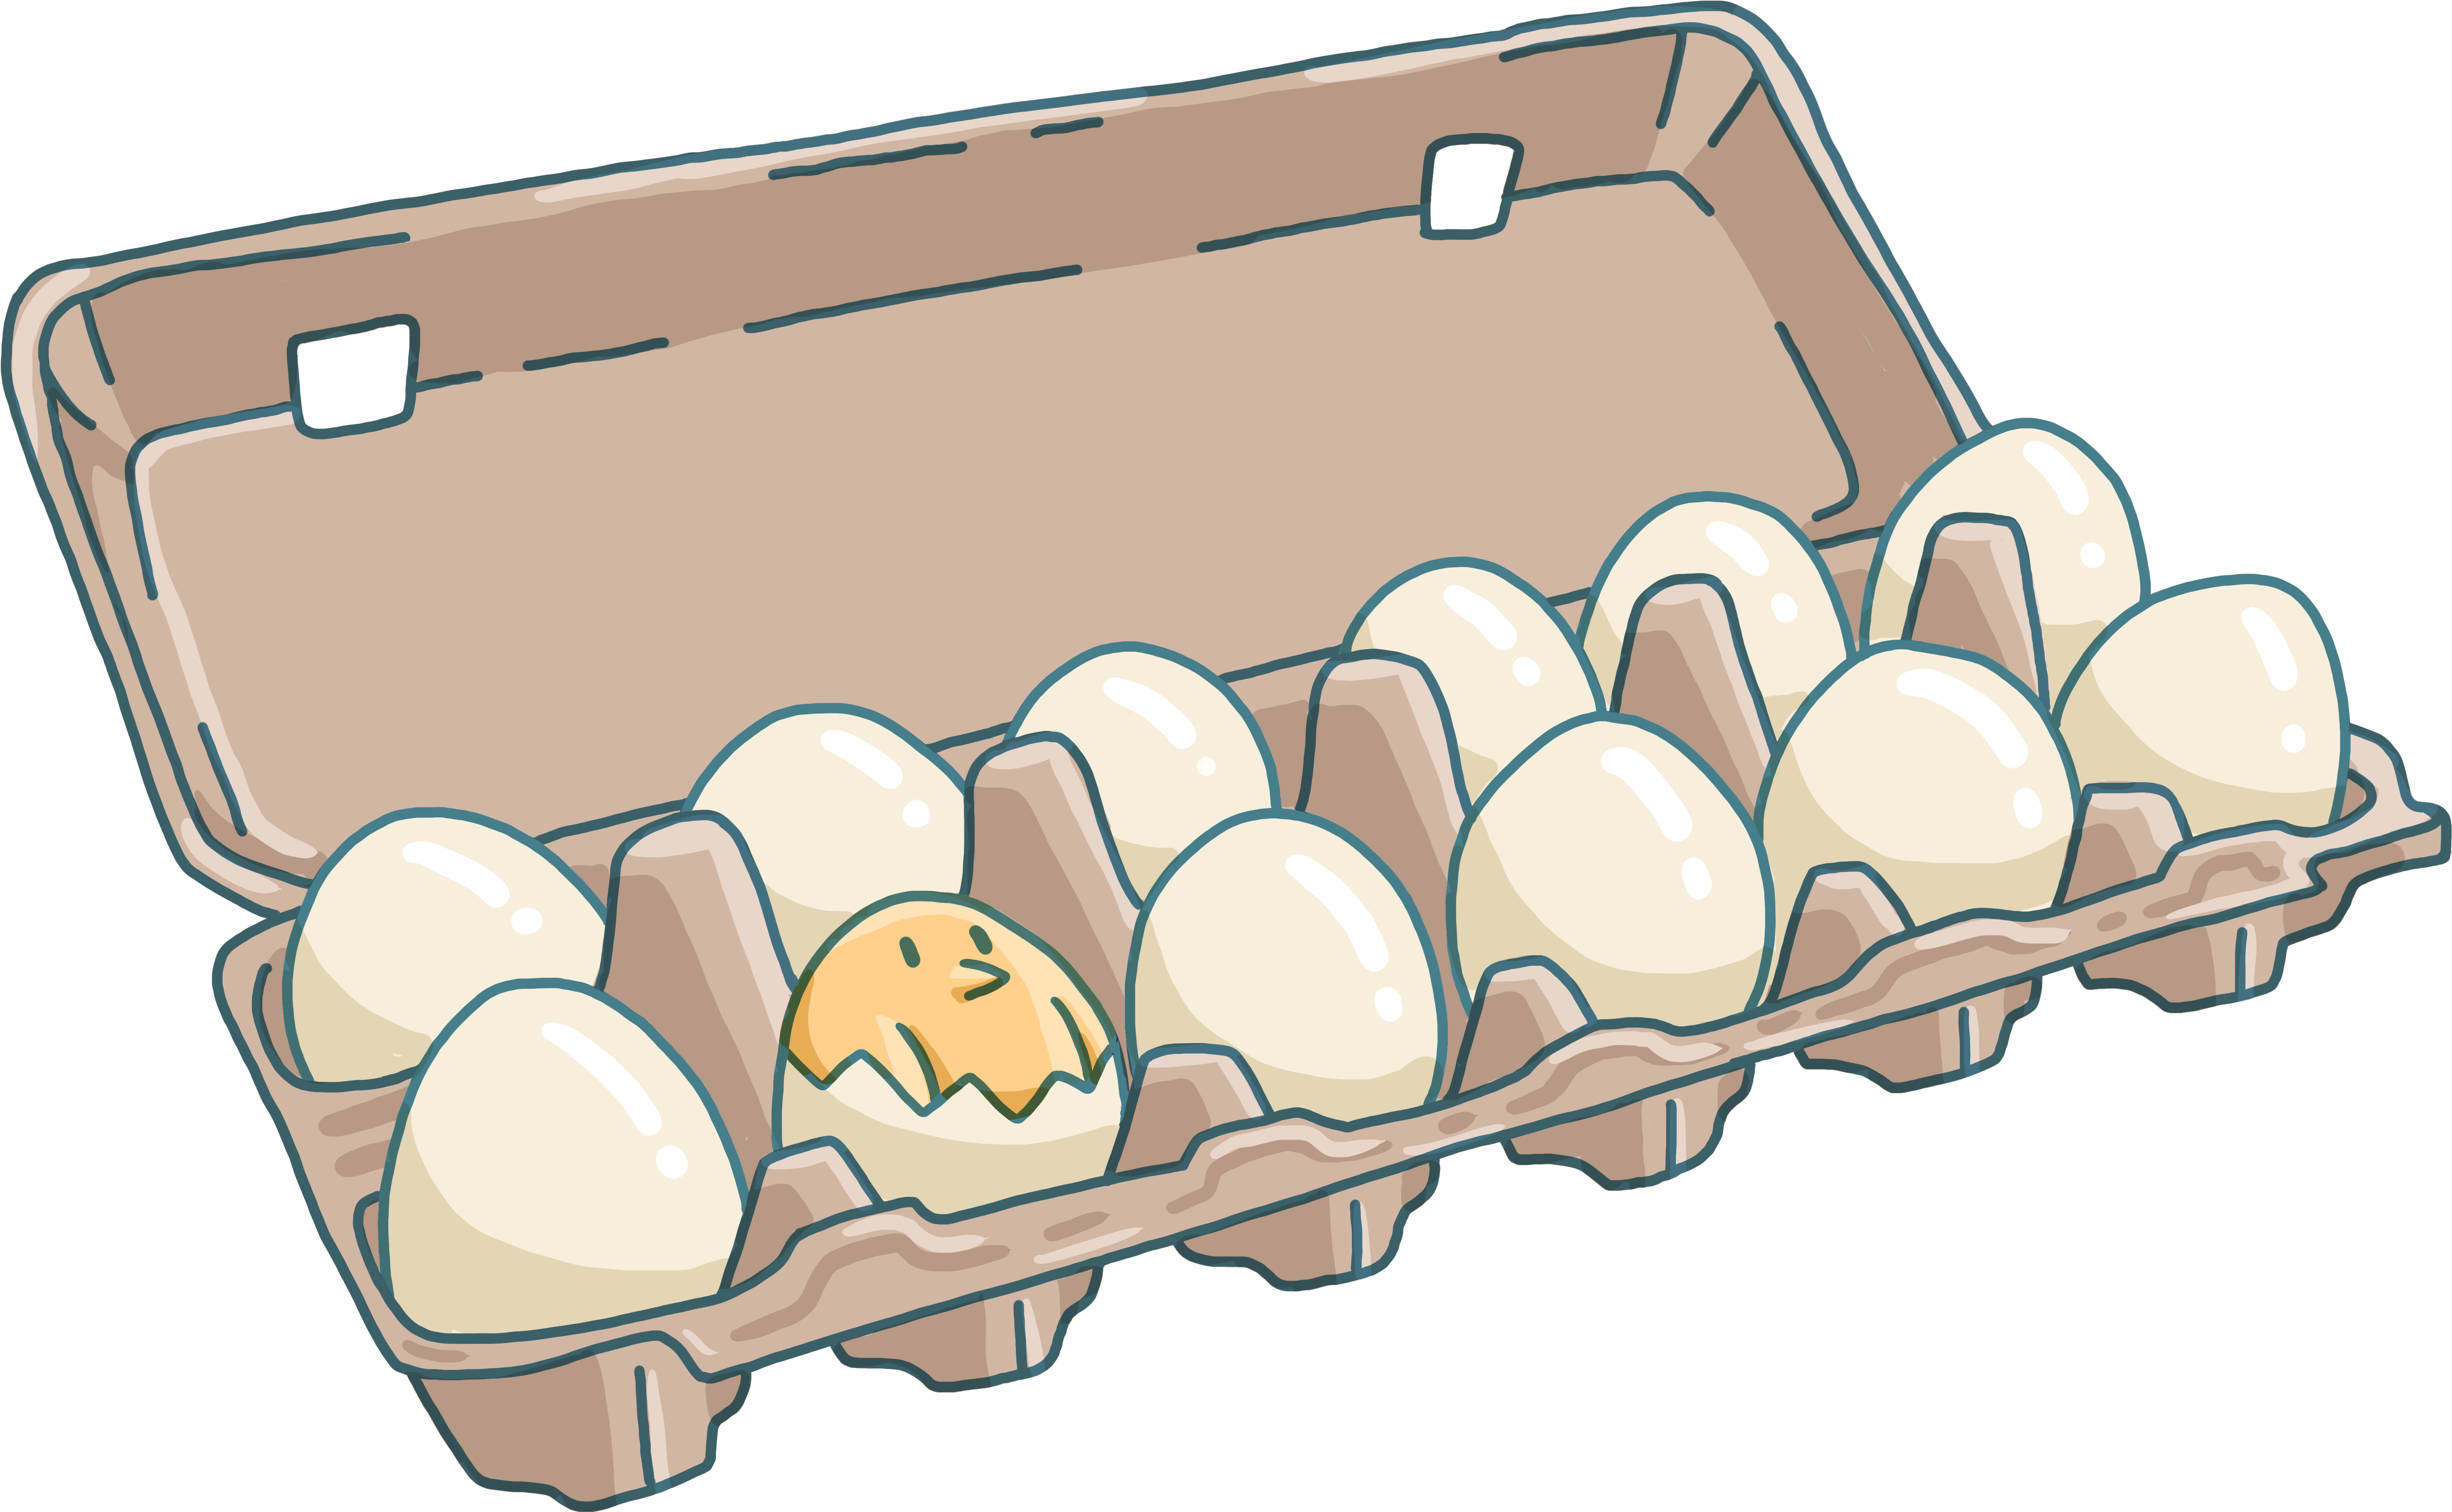 A Carton Of Eggs With A Cartoon Egg In It